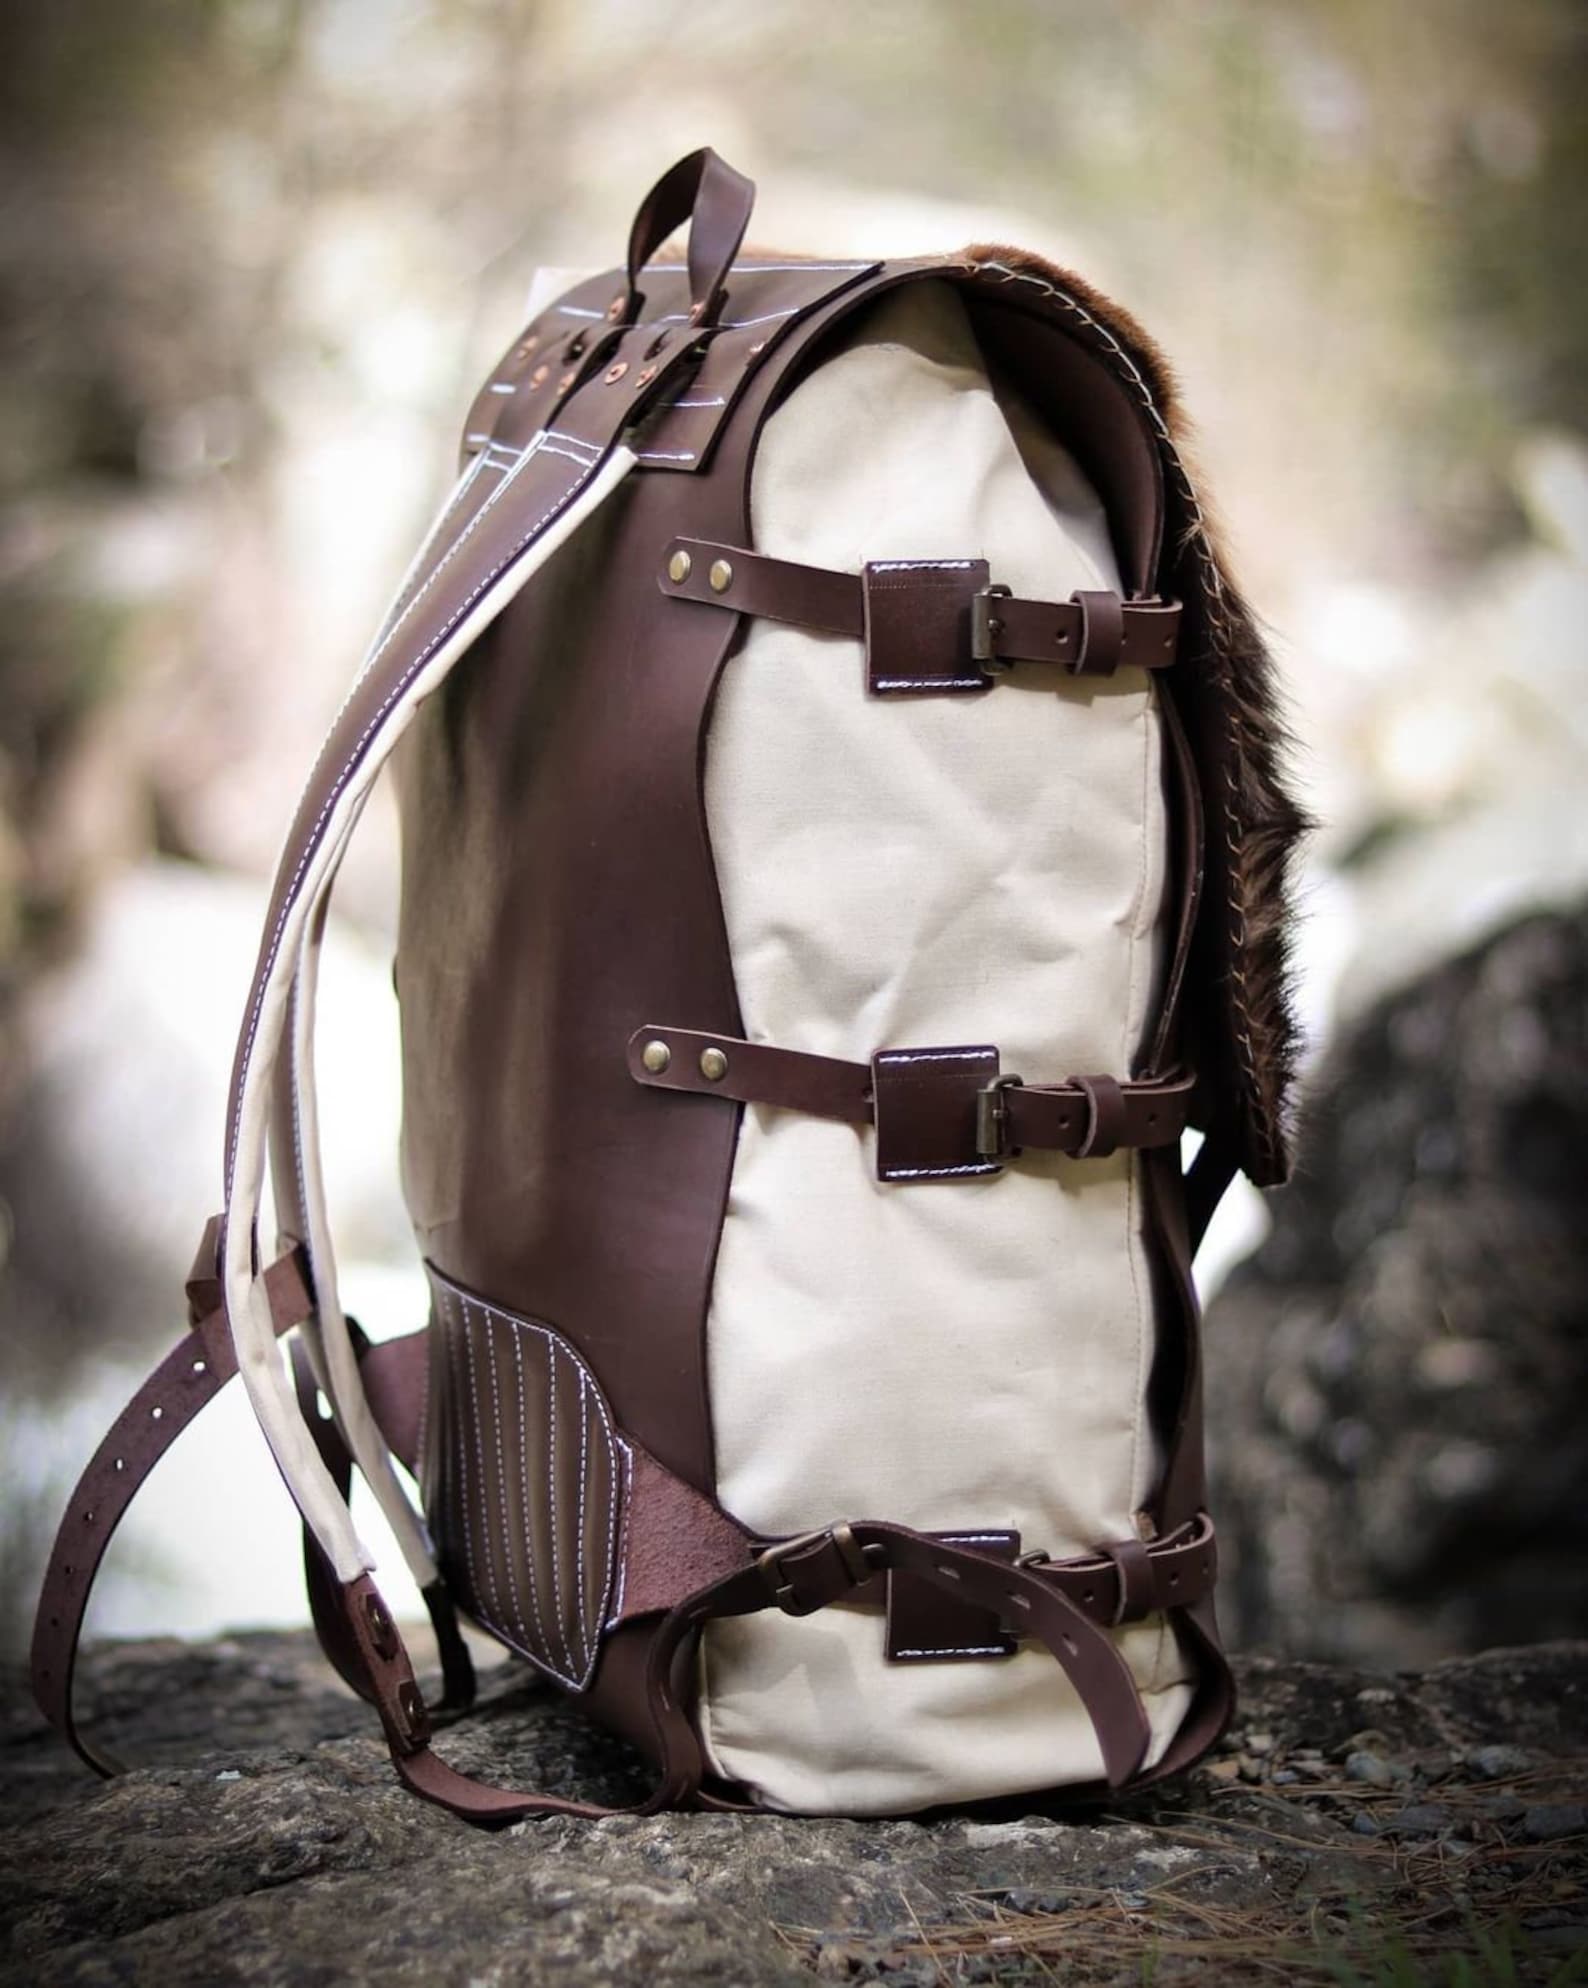 Goat Fur , Canvas and Leather Bag | Bushcraft | Camping | Outdoor | Hiking | Handmade Backpack l | 30,40,50 Litres option - bushcraft - camping - hiking backpack - 99percenthandmade - 99percenthandmade - White - 30 - With Fur